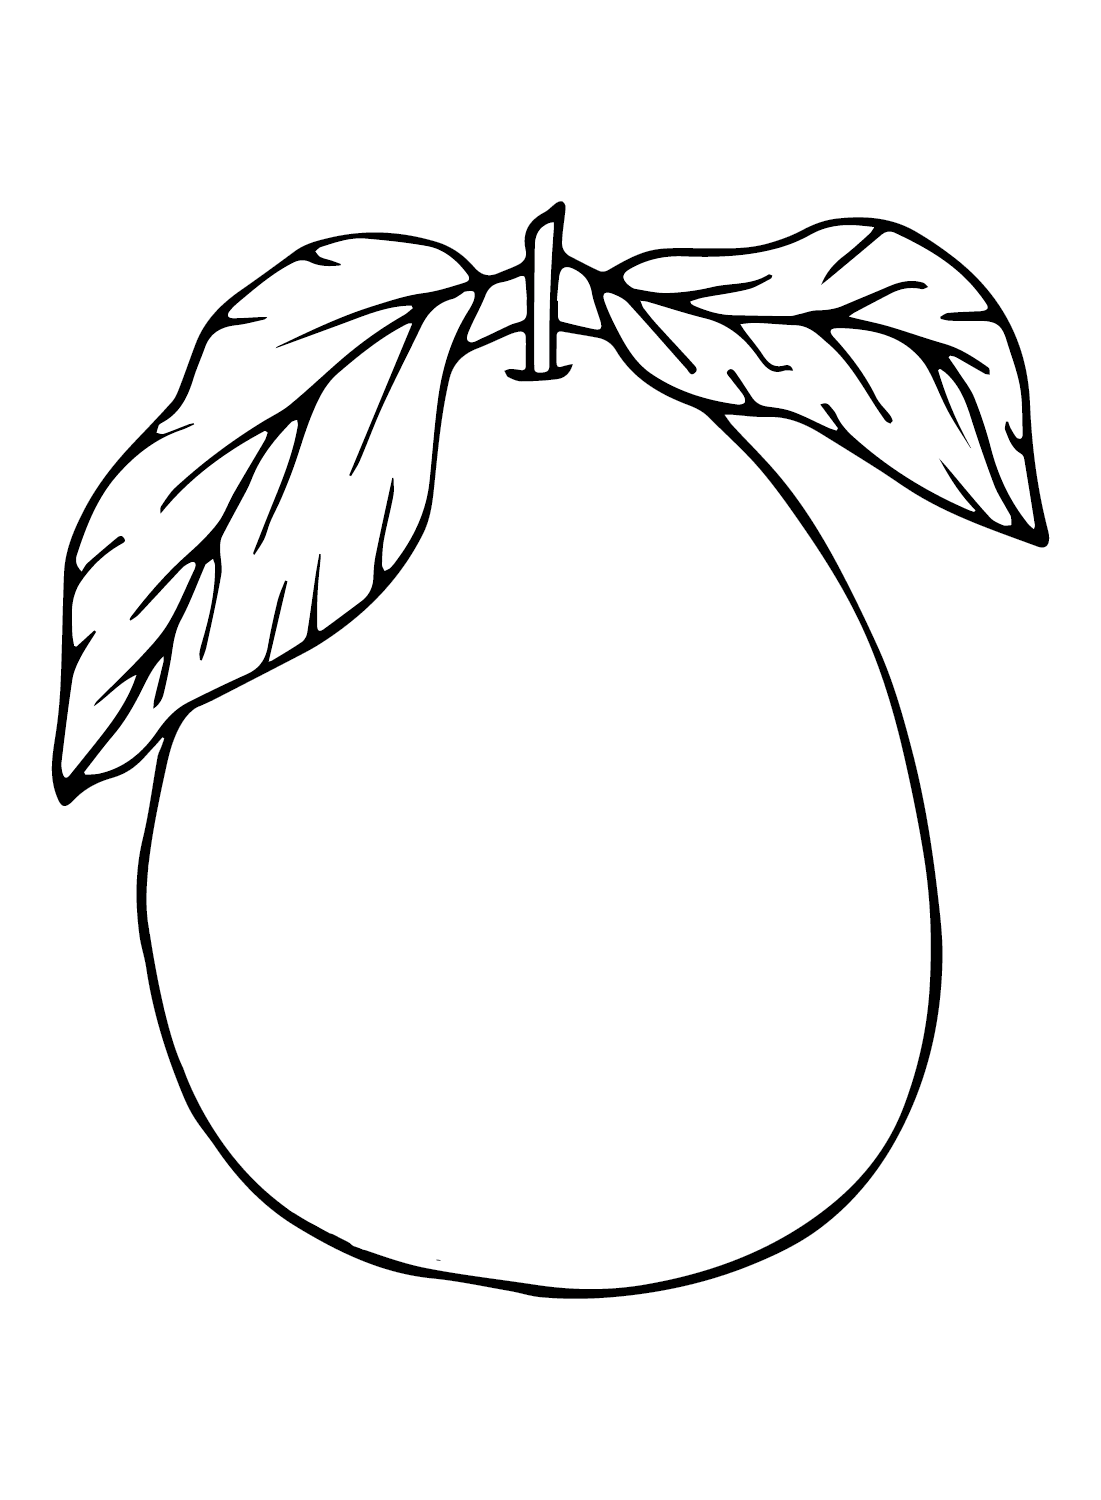 The Pomelo Coloring Page